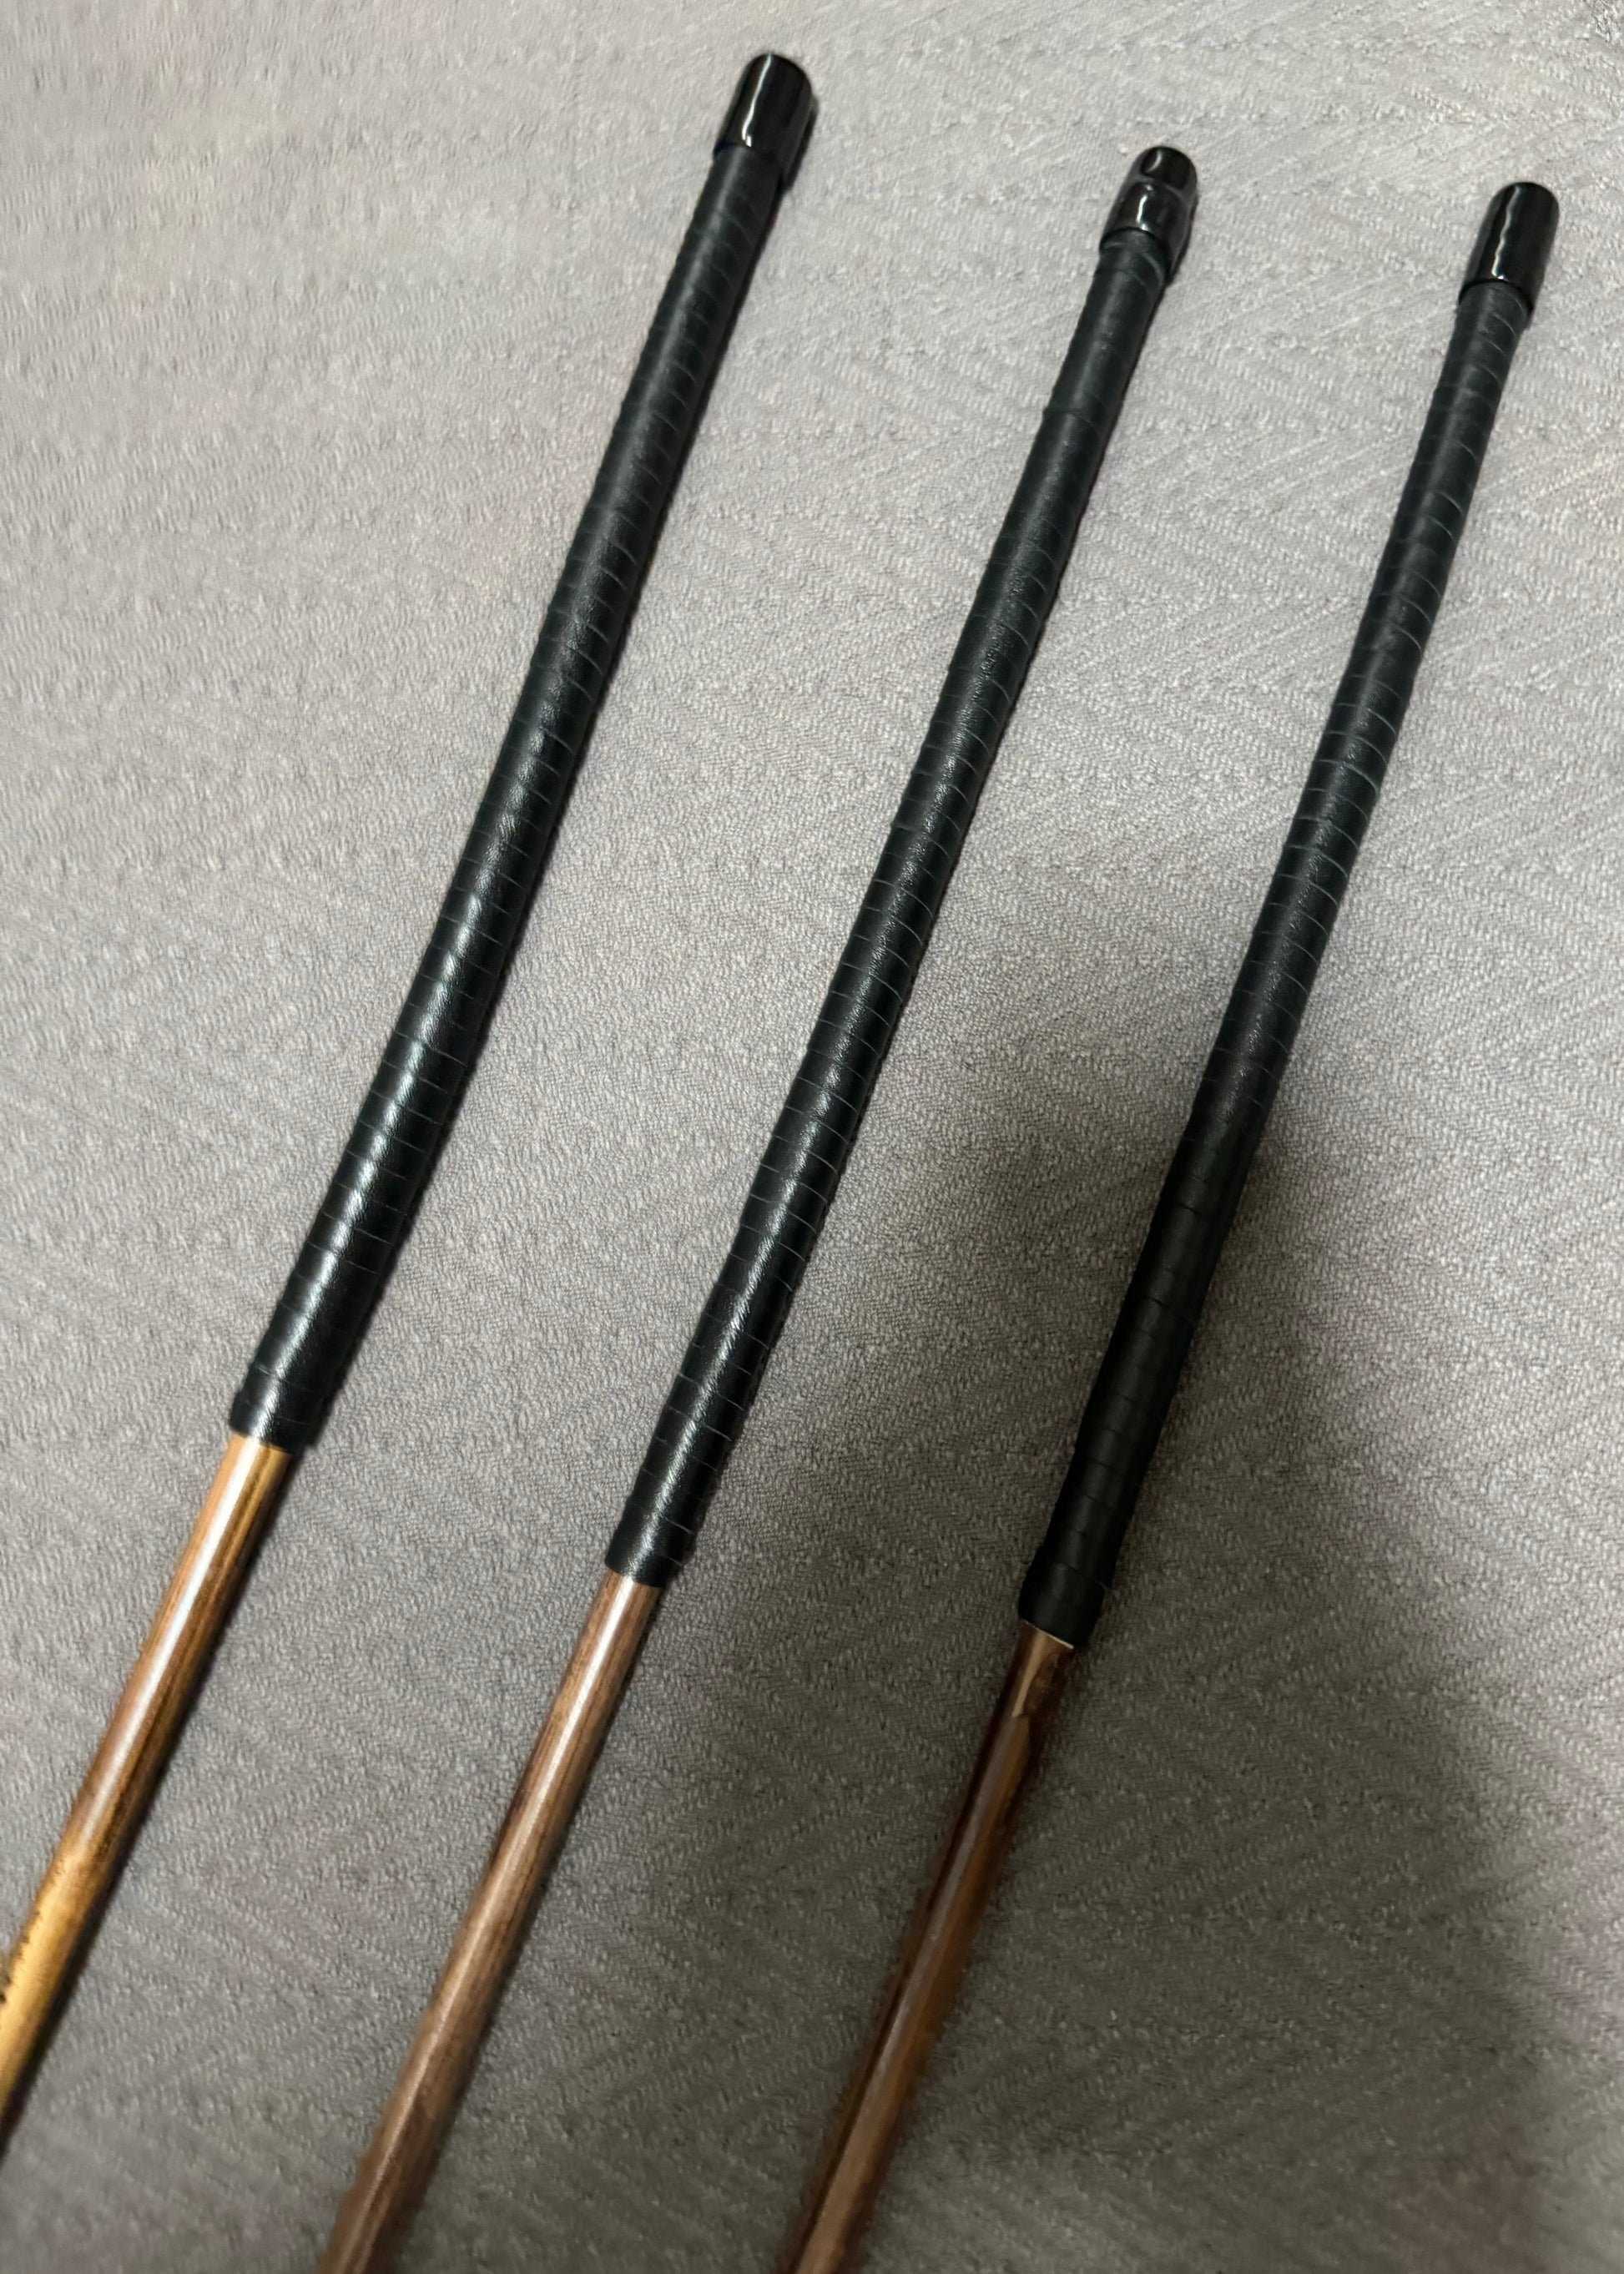 Set of 3 Knotless Smoked Dragon Canes / Ultimate No Knot Smoked Dragon Canes  - 90 to 92 cms Length - Black Kangaroo Leather Handles - Englishvice Canes